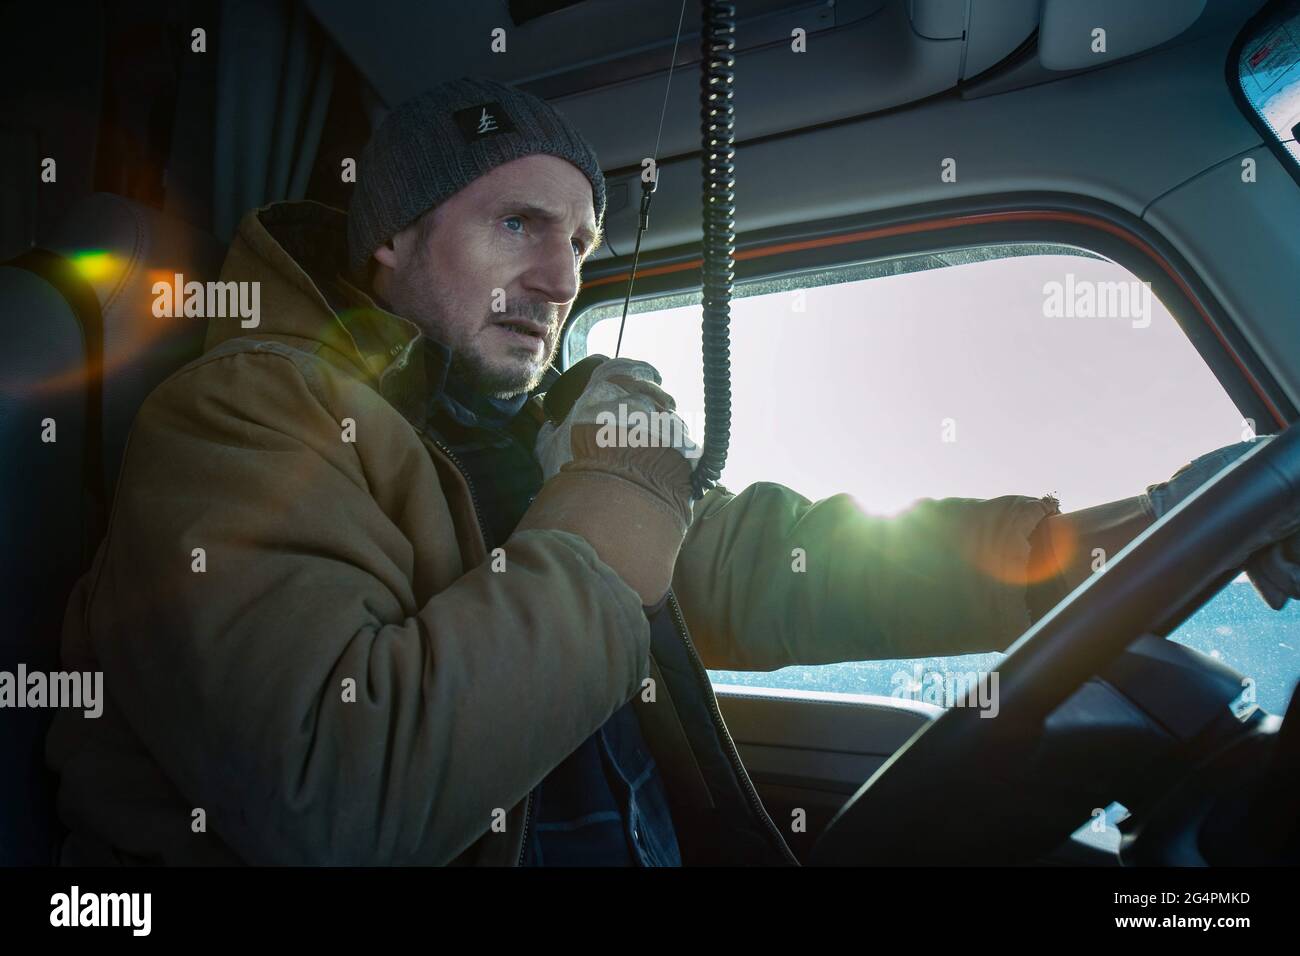 RELEASE DATE: June 25, 2021 TITLE: The Ice Road STUDIO: Netflix DIRECTOR: Jonathan Hensleigh PLOT: After a remote diamond mine collapses in the far northern regions of Canada, an ice driver leads an impossible rescue mission over a frozen ocean to save the lives of trapped miners. STARRING: LIAM NEESON as Mike. (Credit Image: © Netflix/Entertainment Pictures) Stock Photo